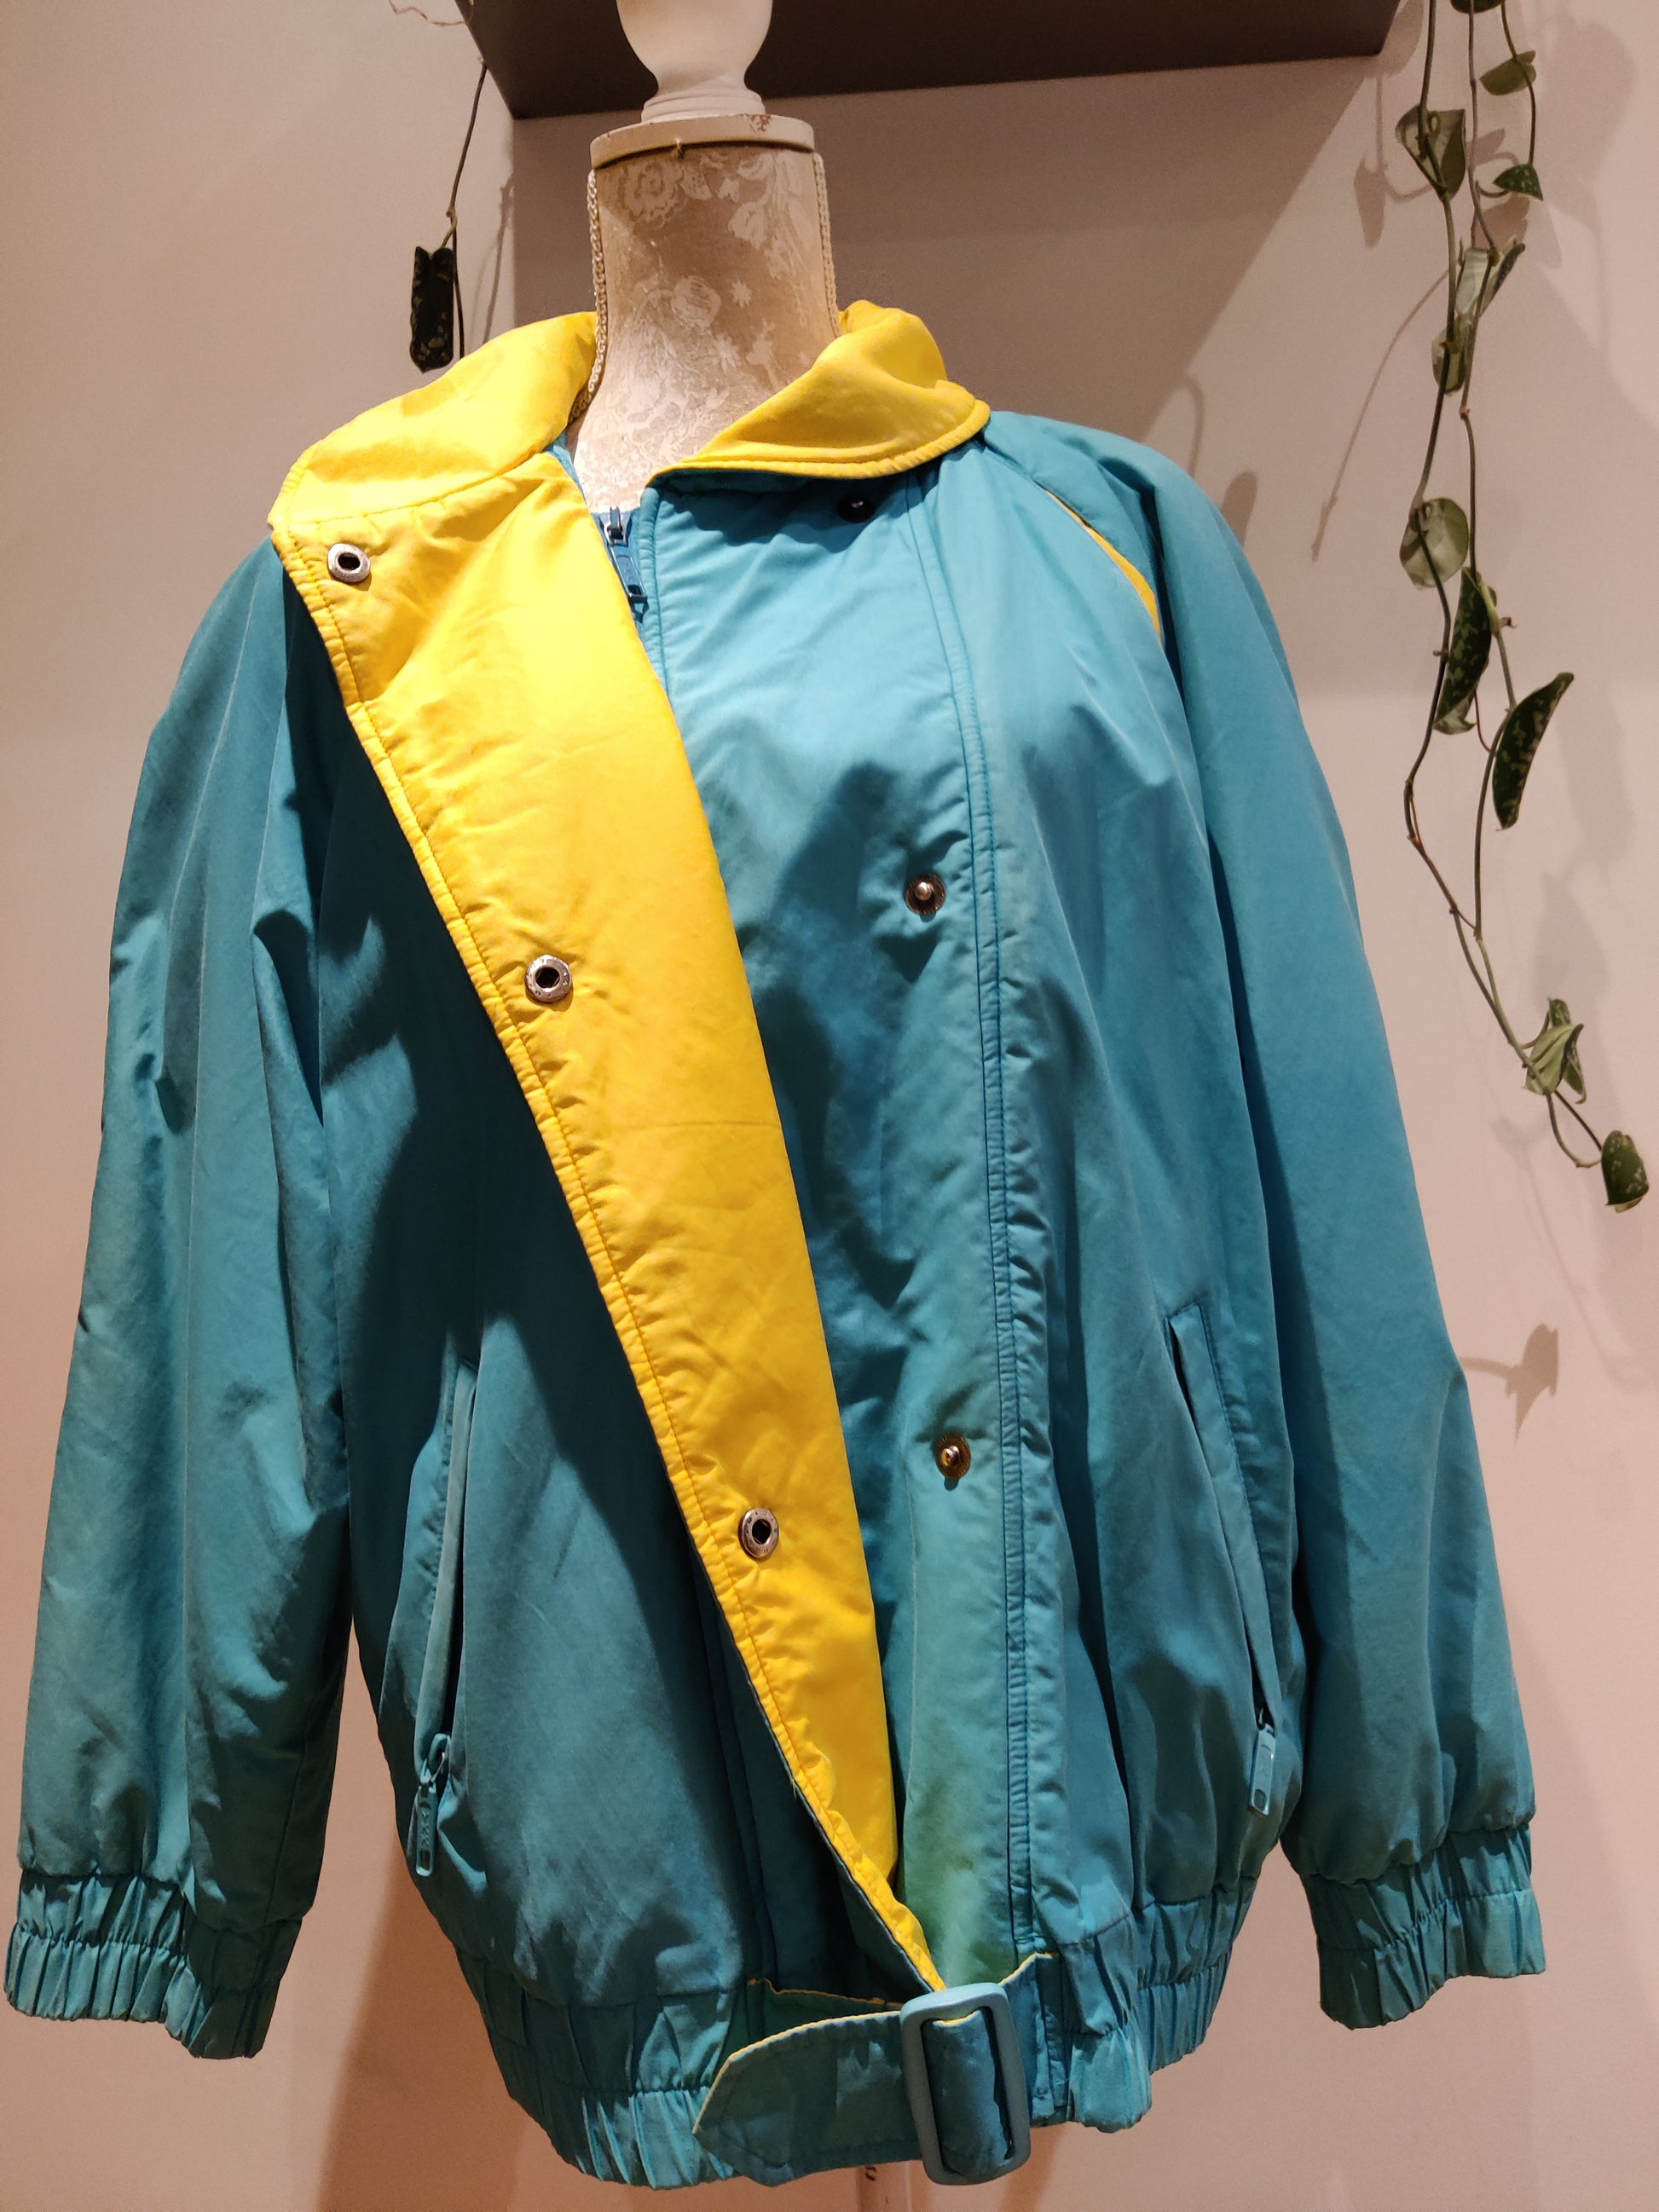 Blue and yellow vintage jacket